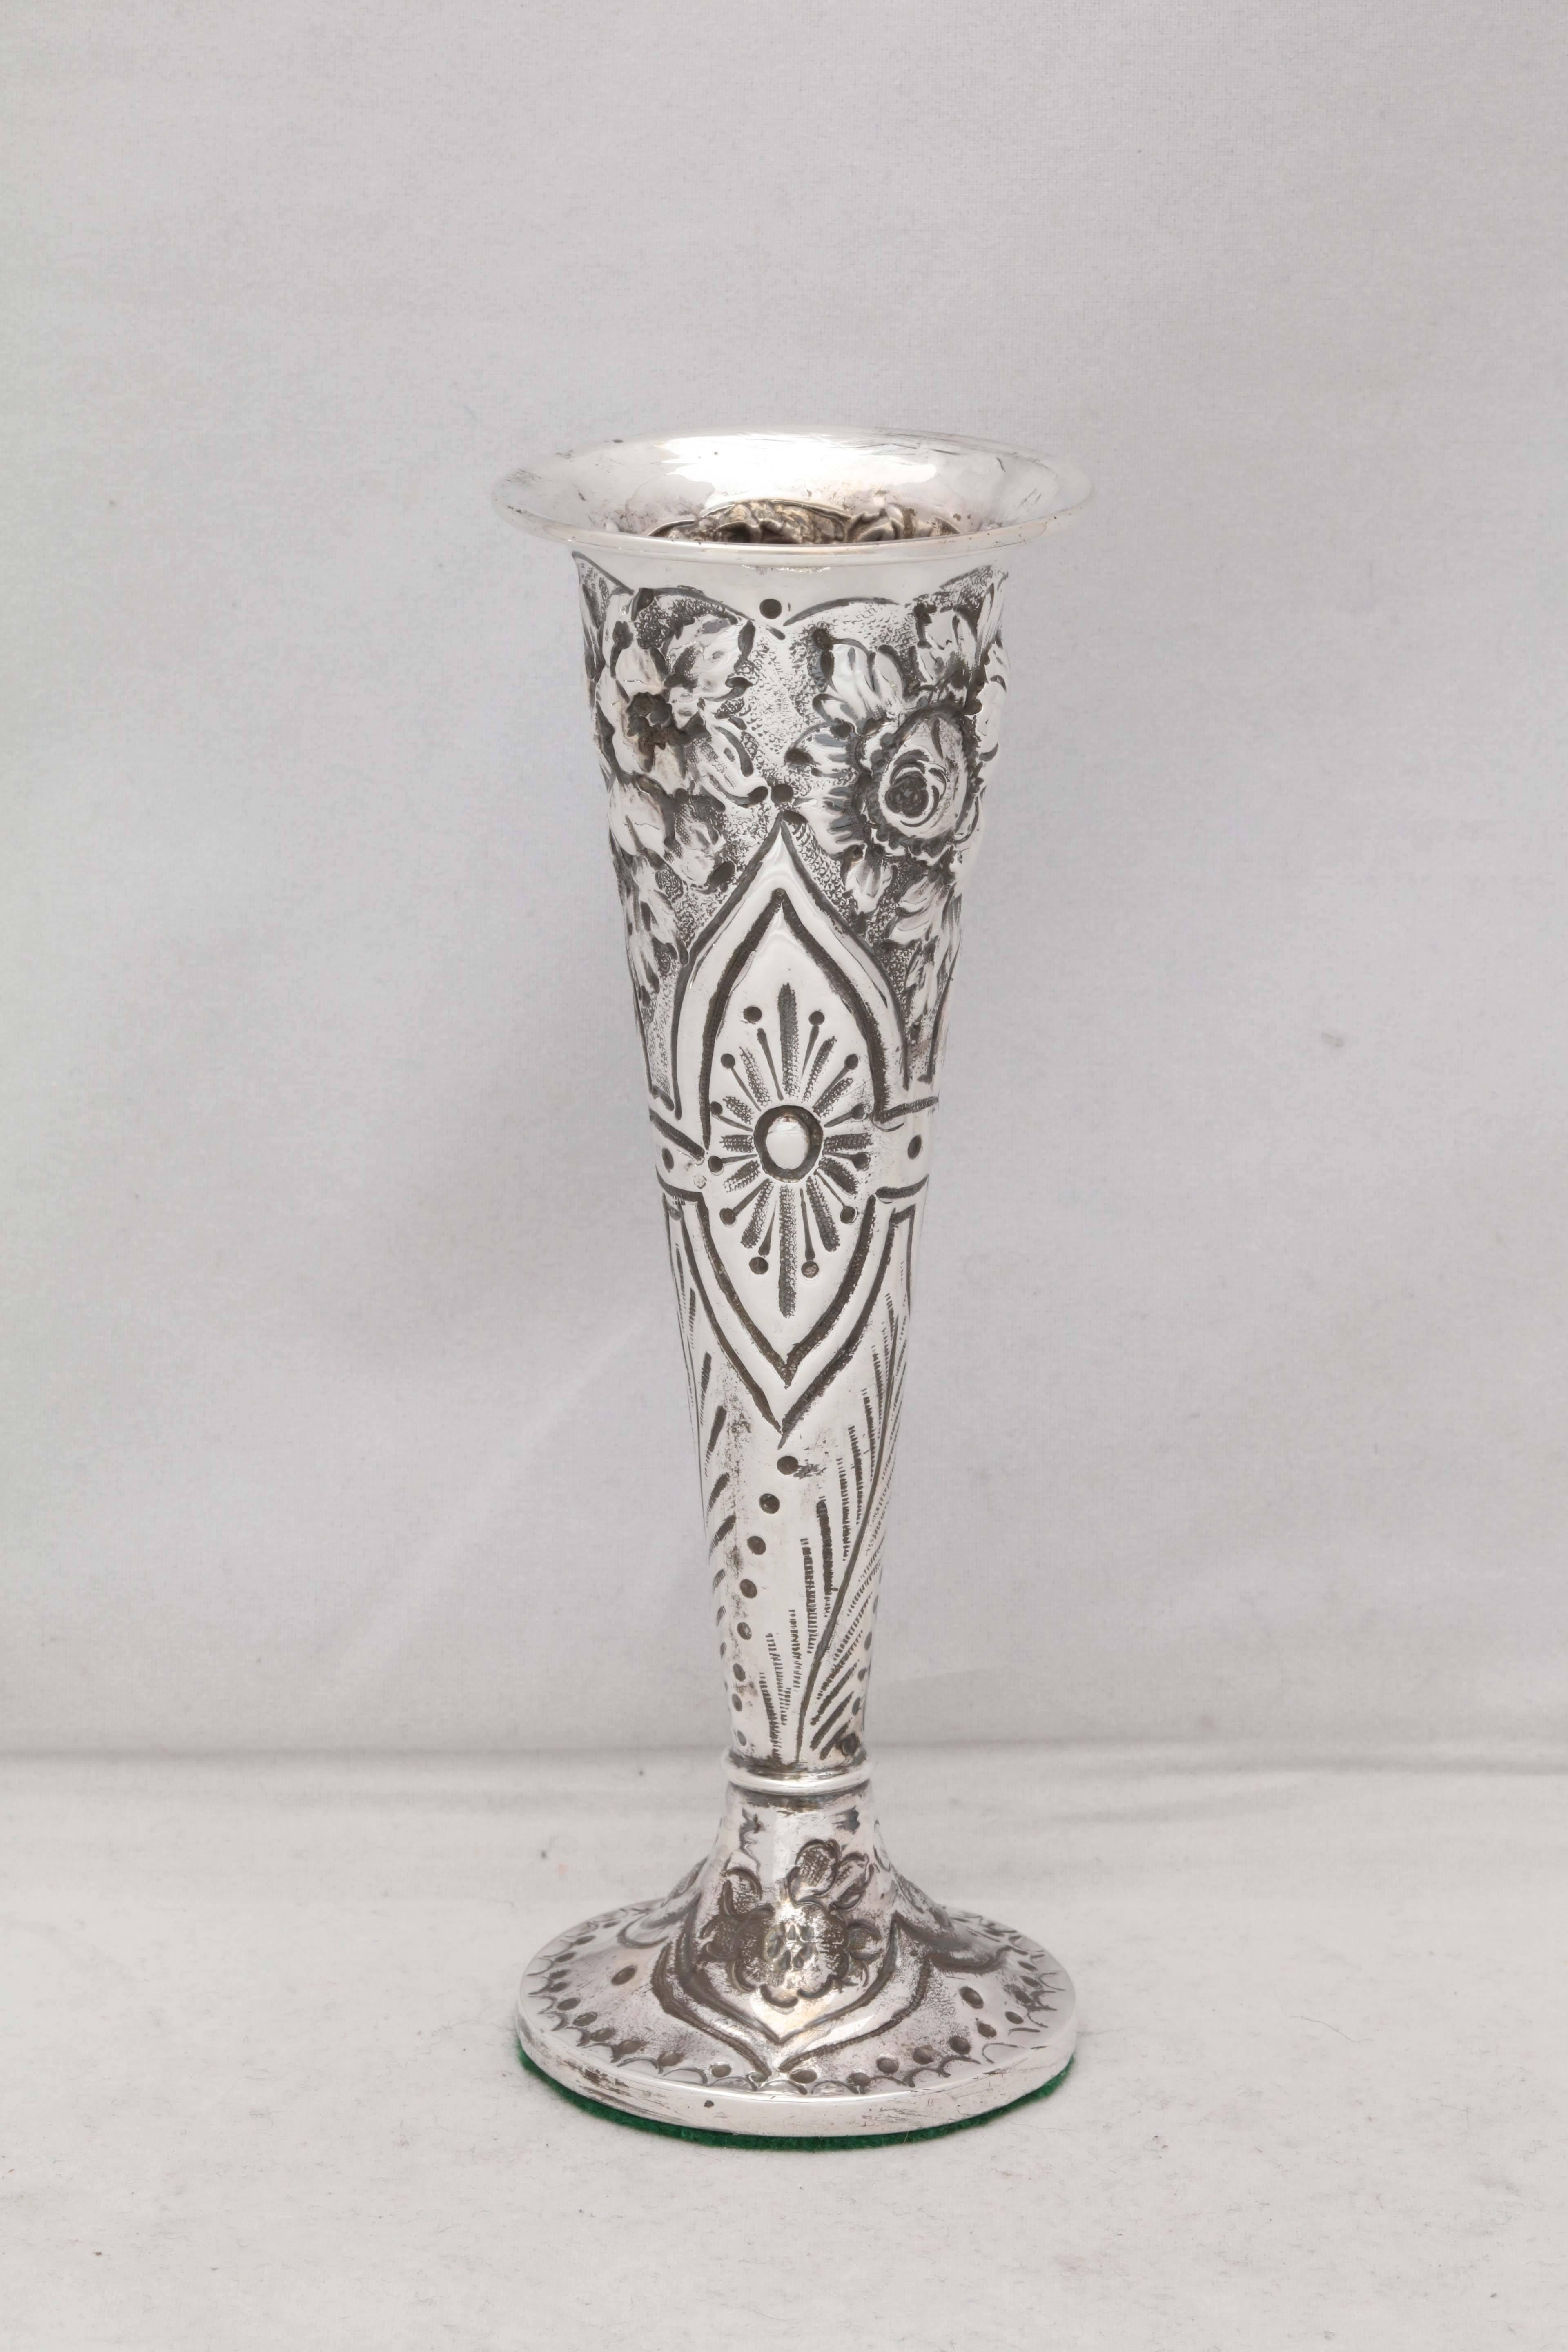 Details about   Antique English Crystal Bud Vase With Sterling Silver Top 